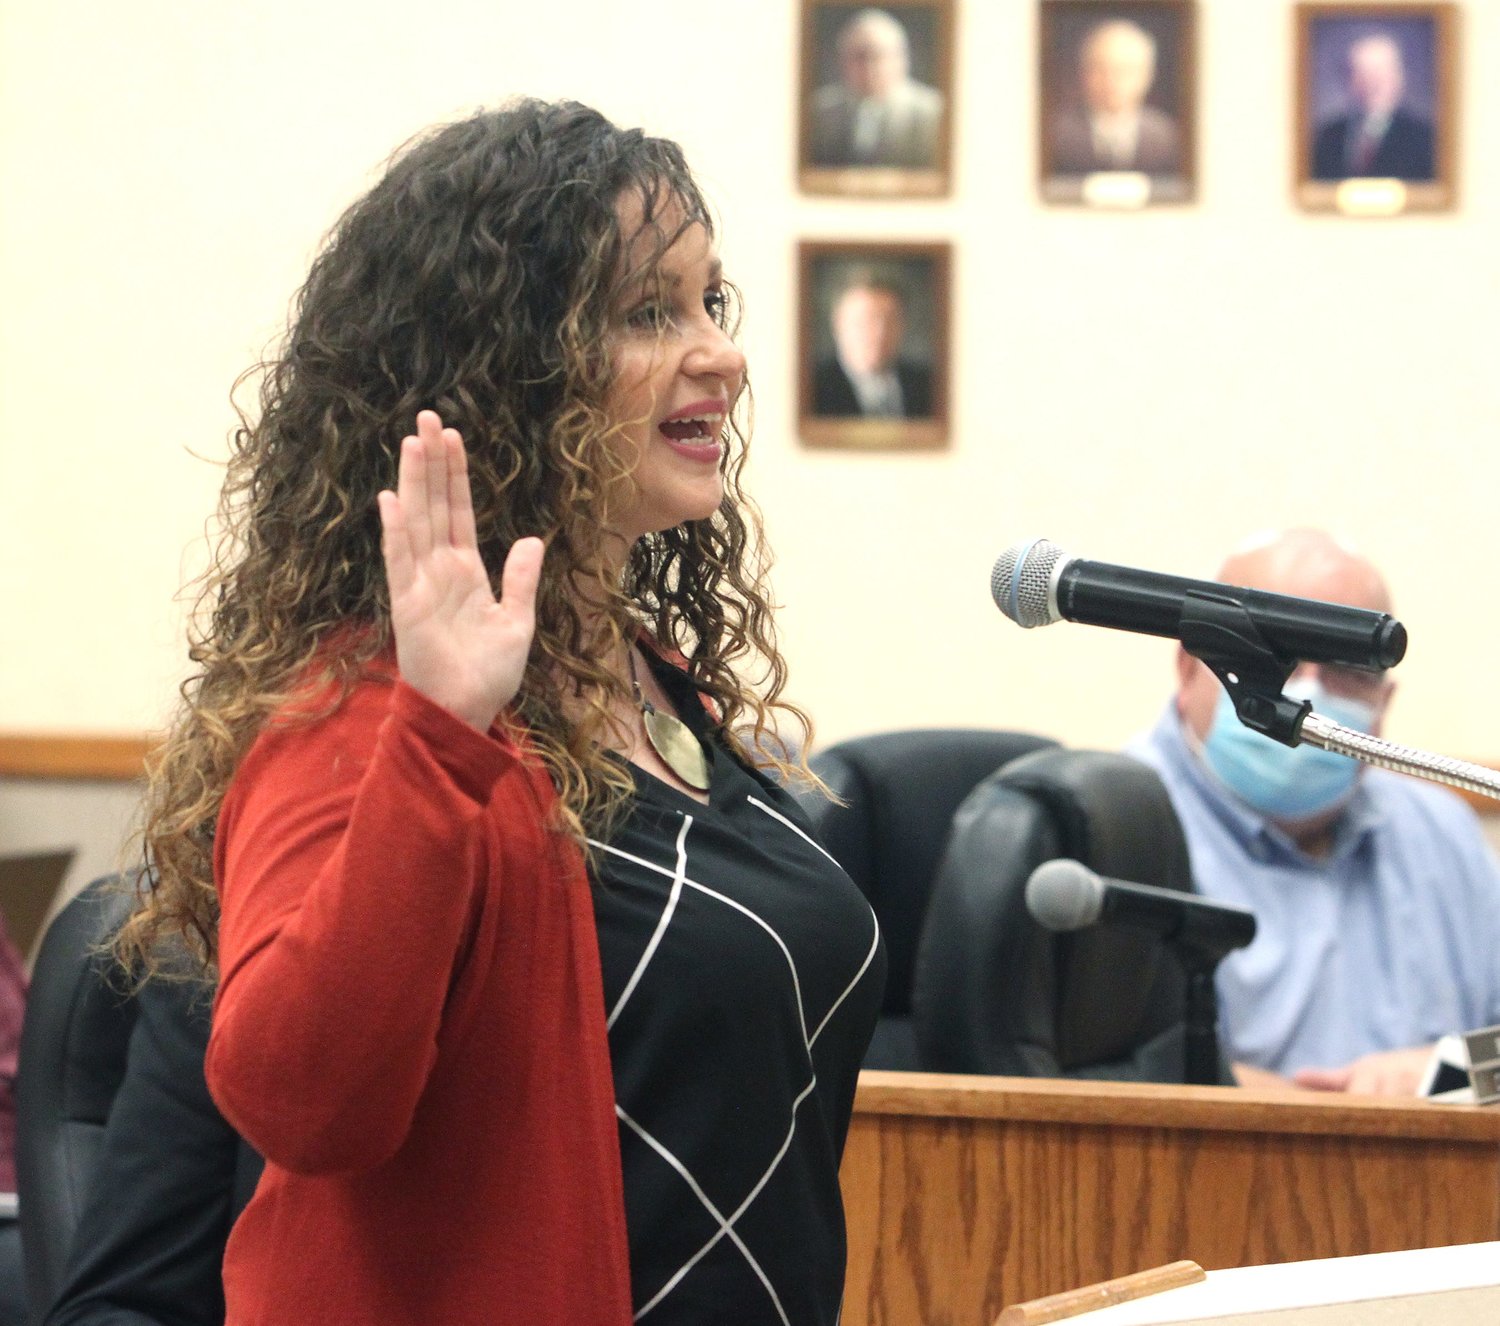 Shannon Hance accepts the oath of office to become the new city clerk during Monday's city council business meeting. Hance transitions from being the deputy city clerk.